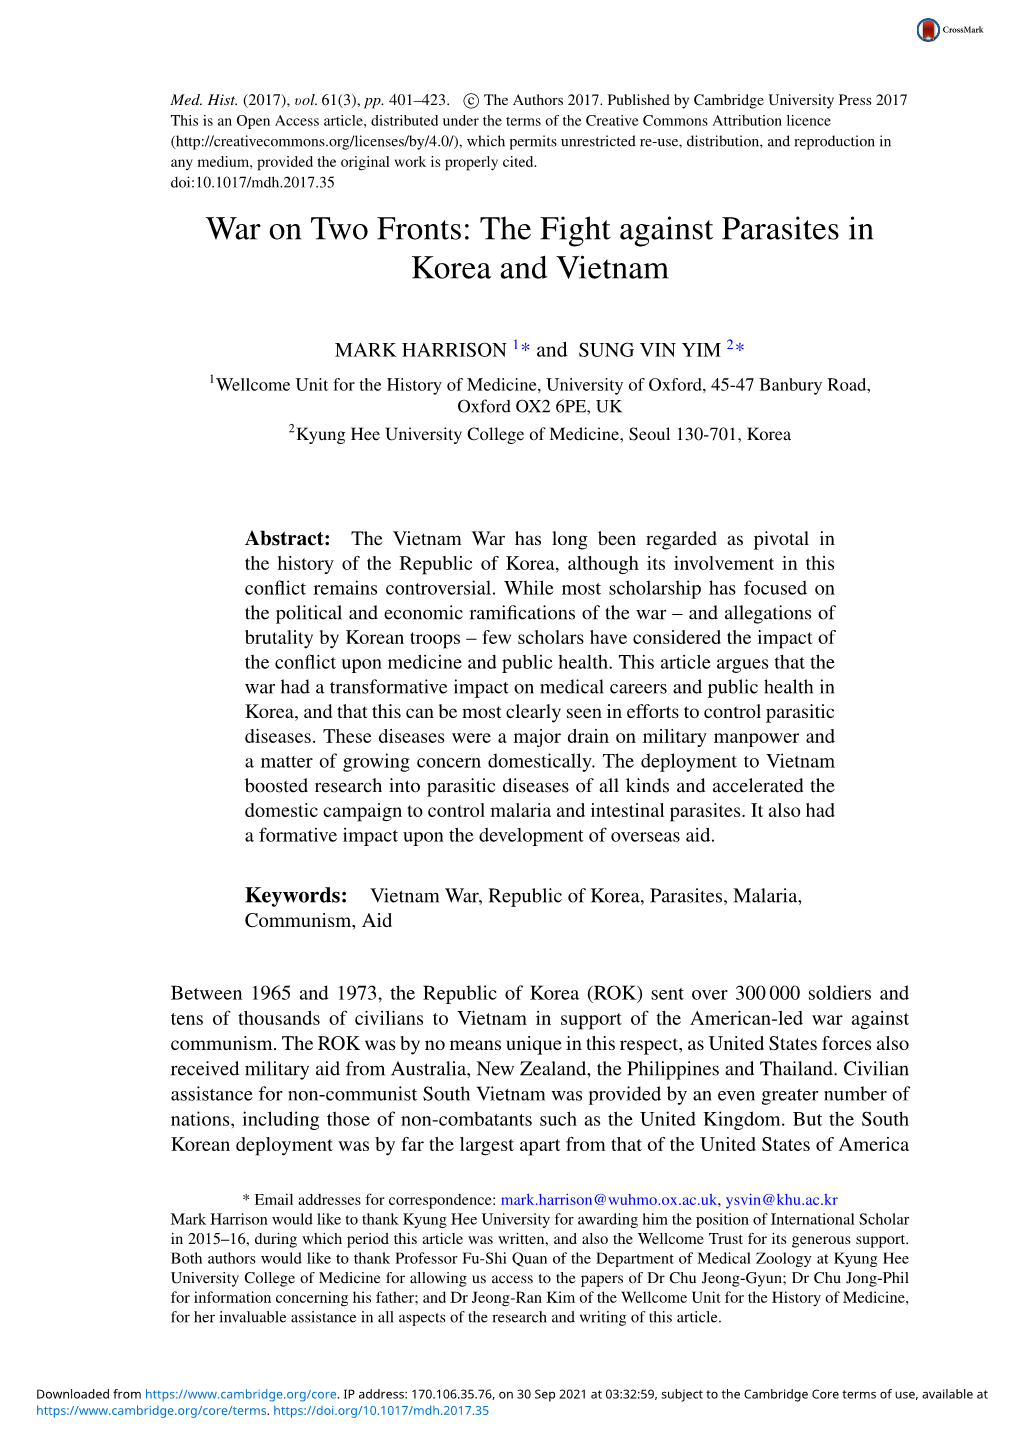 War on Two Fronts: the Fight Against Parasites in Korea and Vietnam